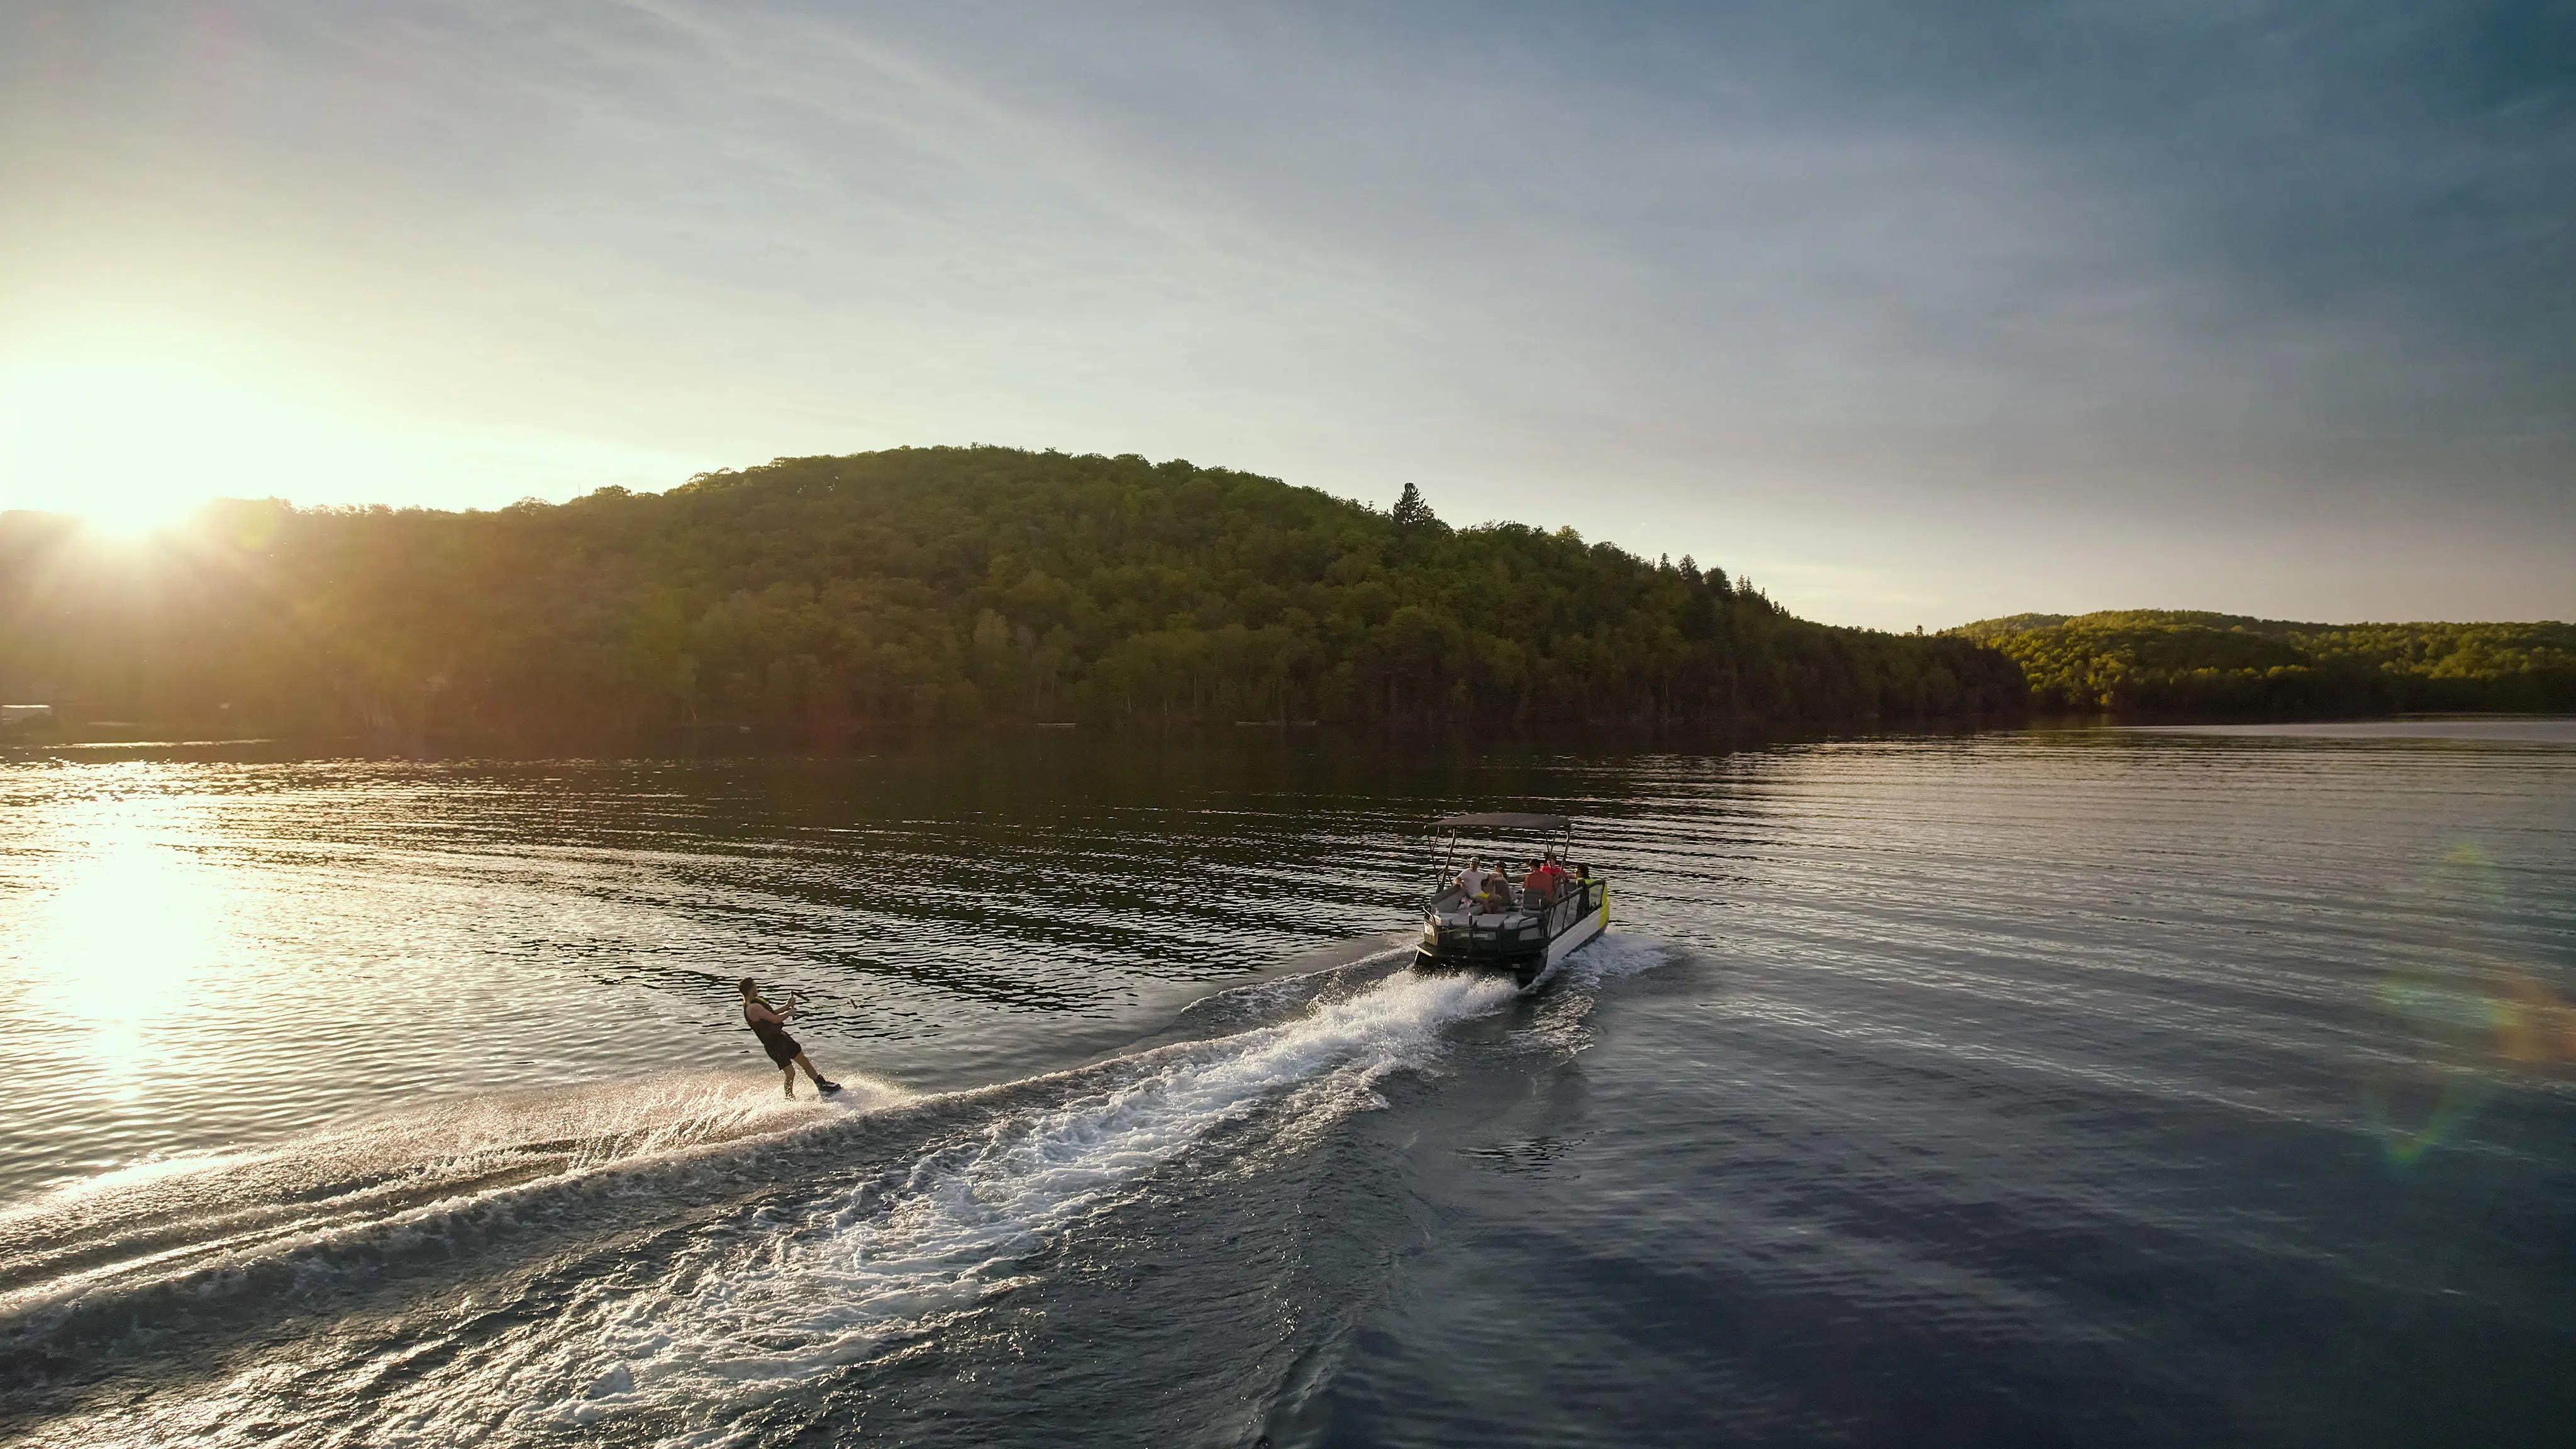 Water sports made easy with Switch Sport. Source: https://www.sea-doo.com/ca/en/pontoons/switch-sport.html